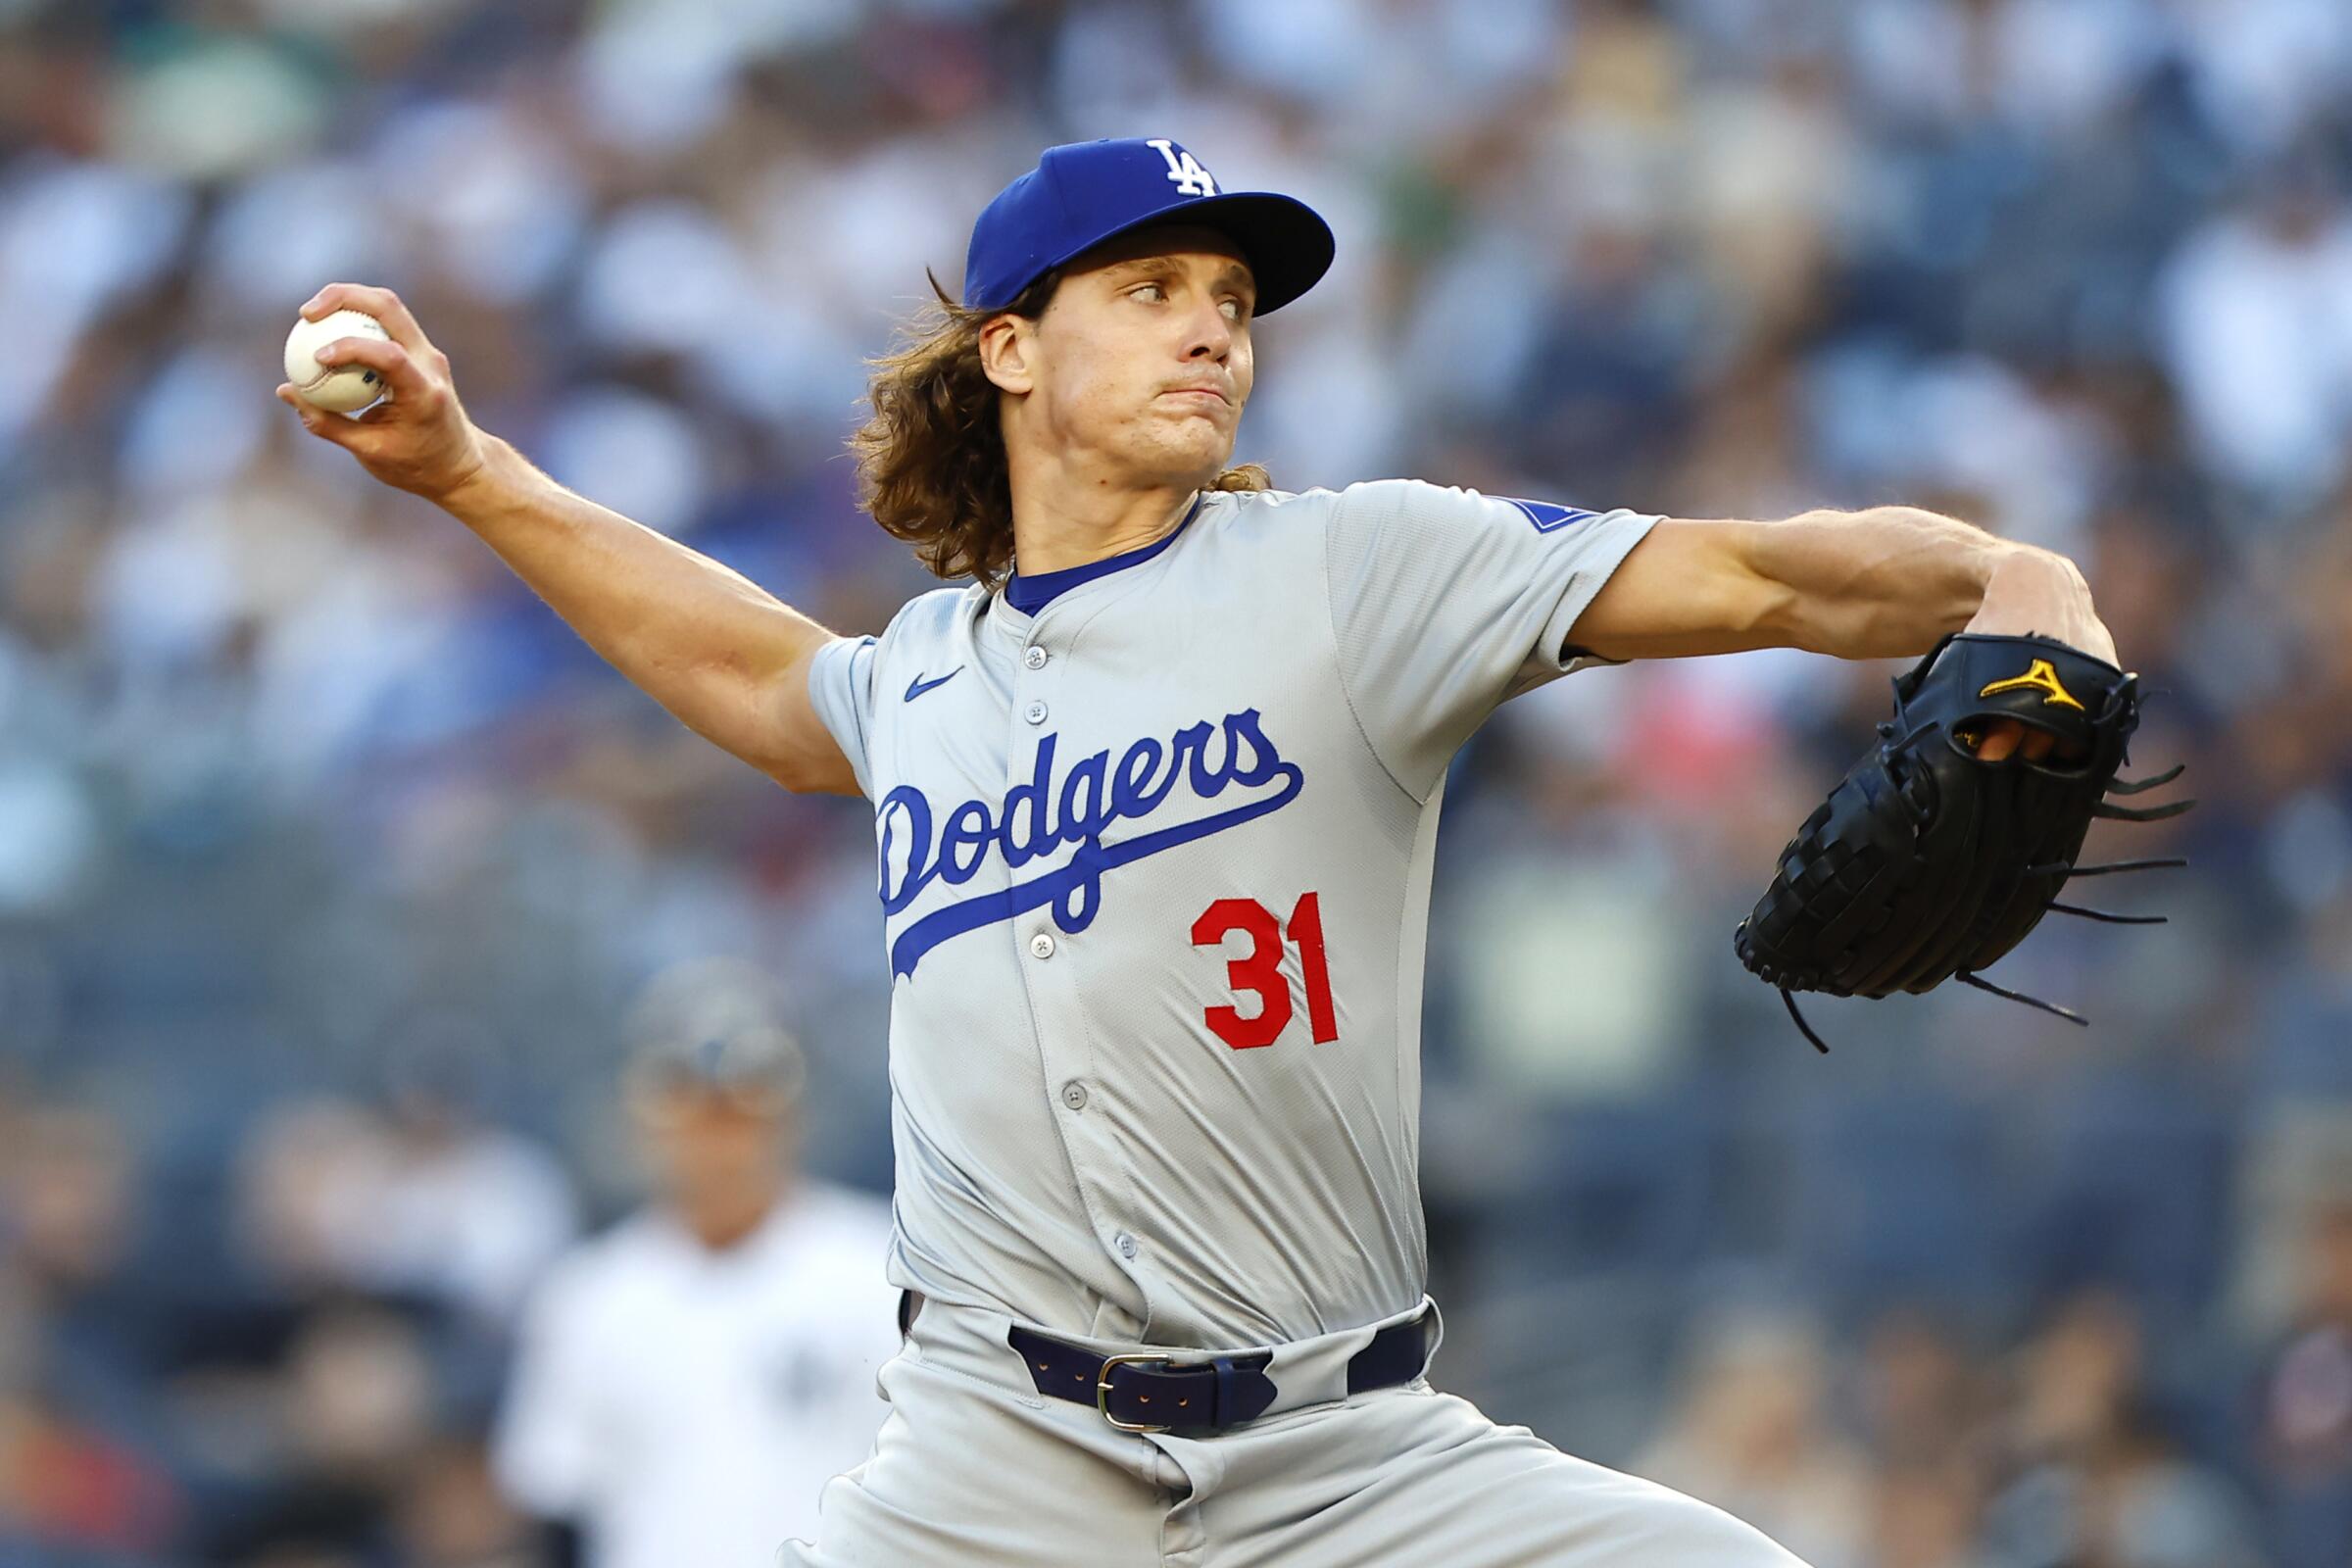 Dodgers pitcher Tyler Glasnow delivers against the New York Yankees 